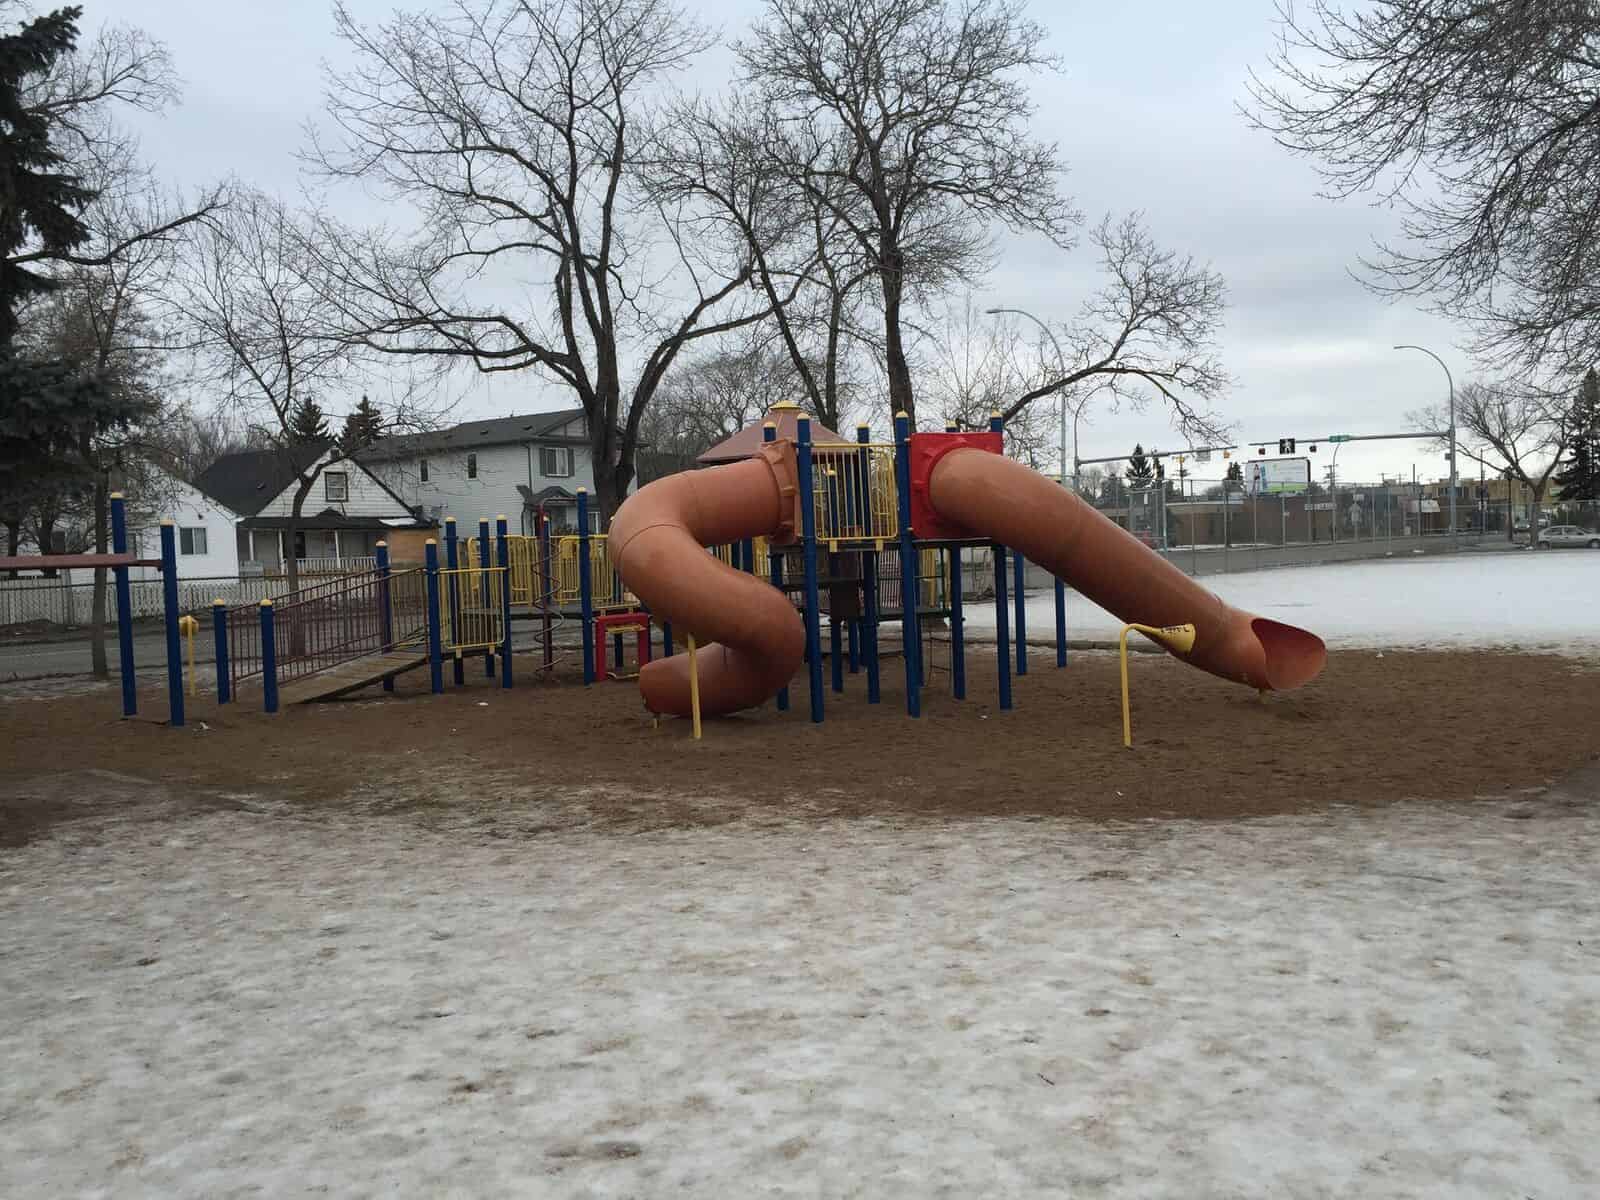 A happy ending for two school playgrounds